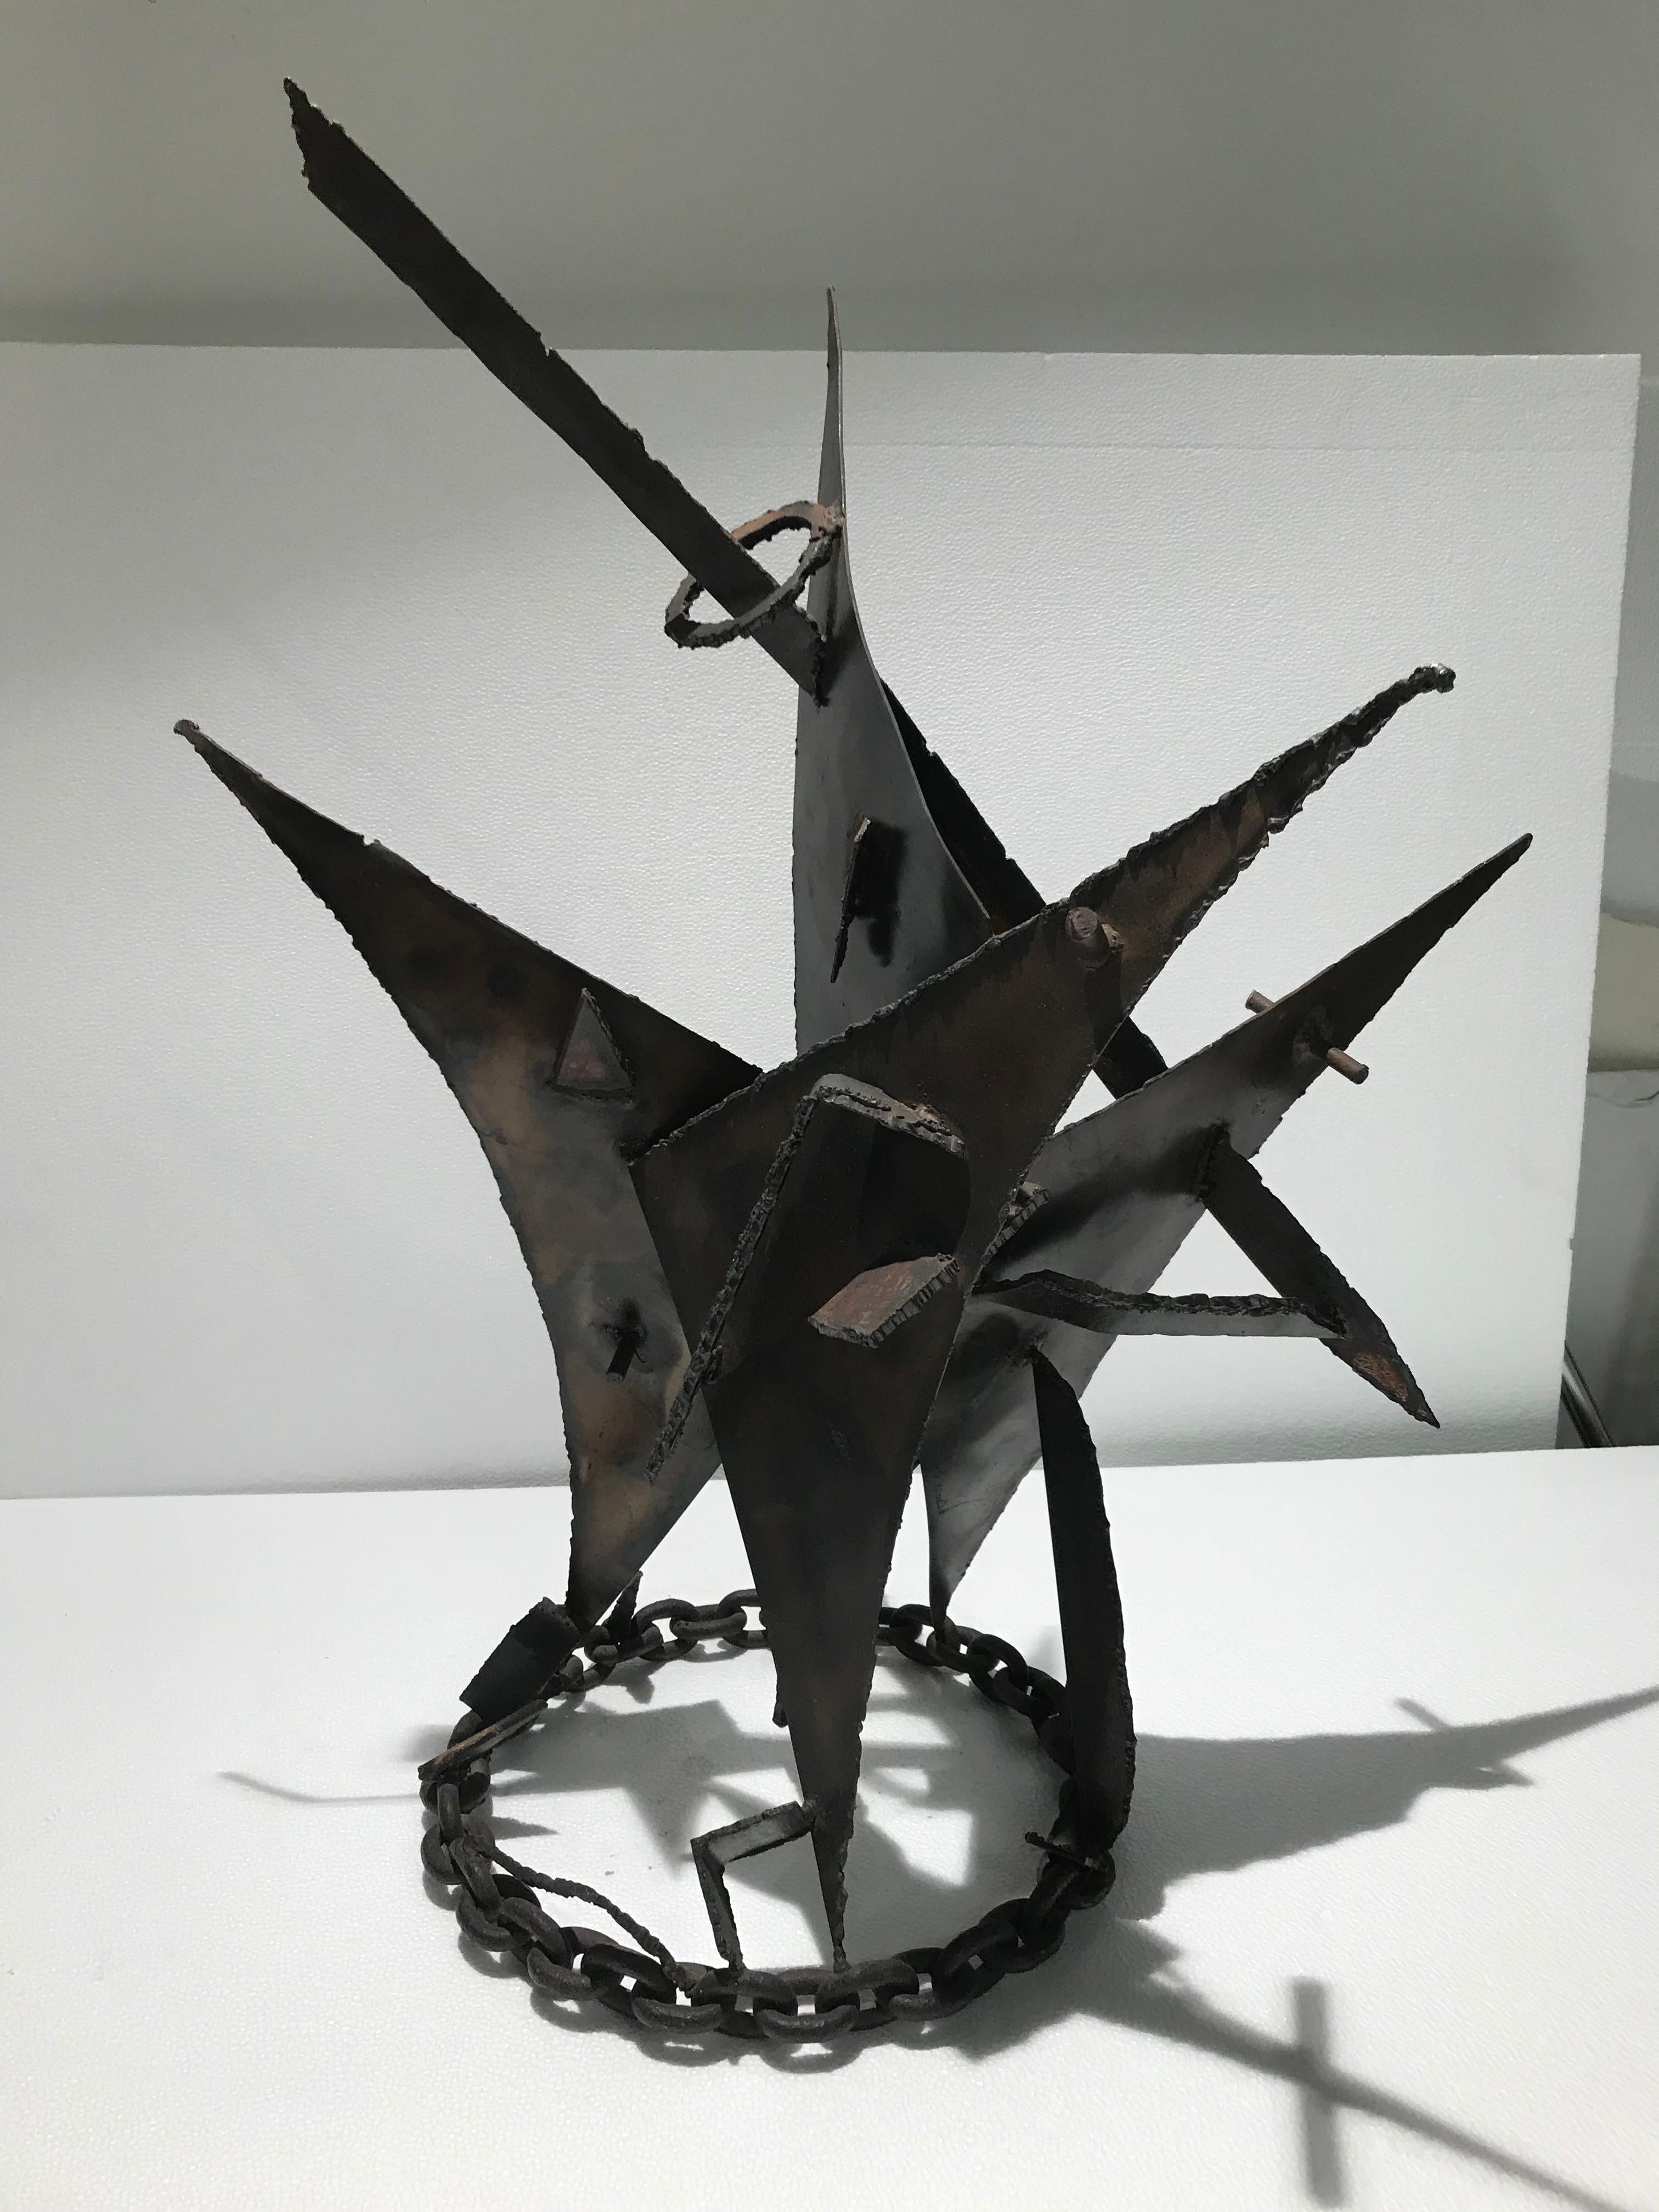 This sculpture, rendered in steel, is composed of 3 triangle shapes fused together and with spear piercing through its body. It has a thought-provoking circular rustic chain base. The abstract figure changes from every perspective and light and has